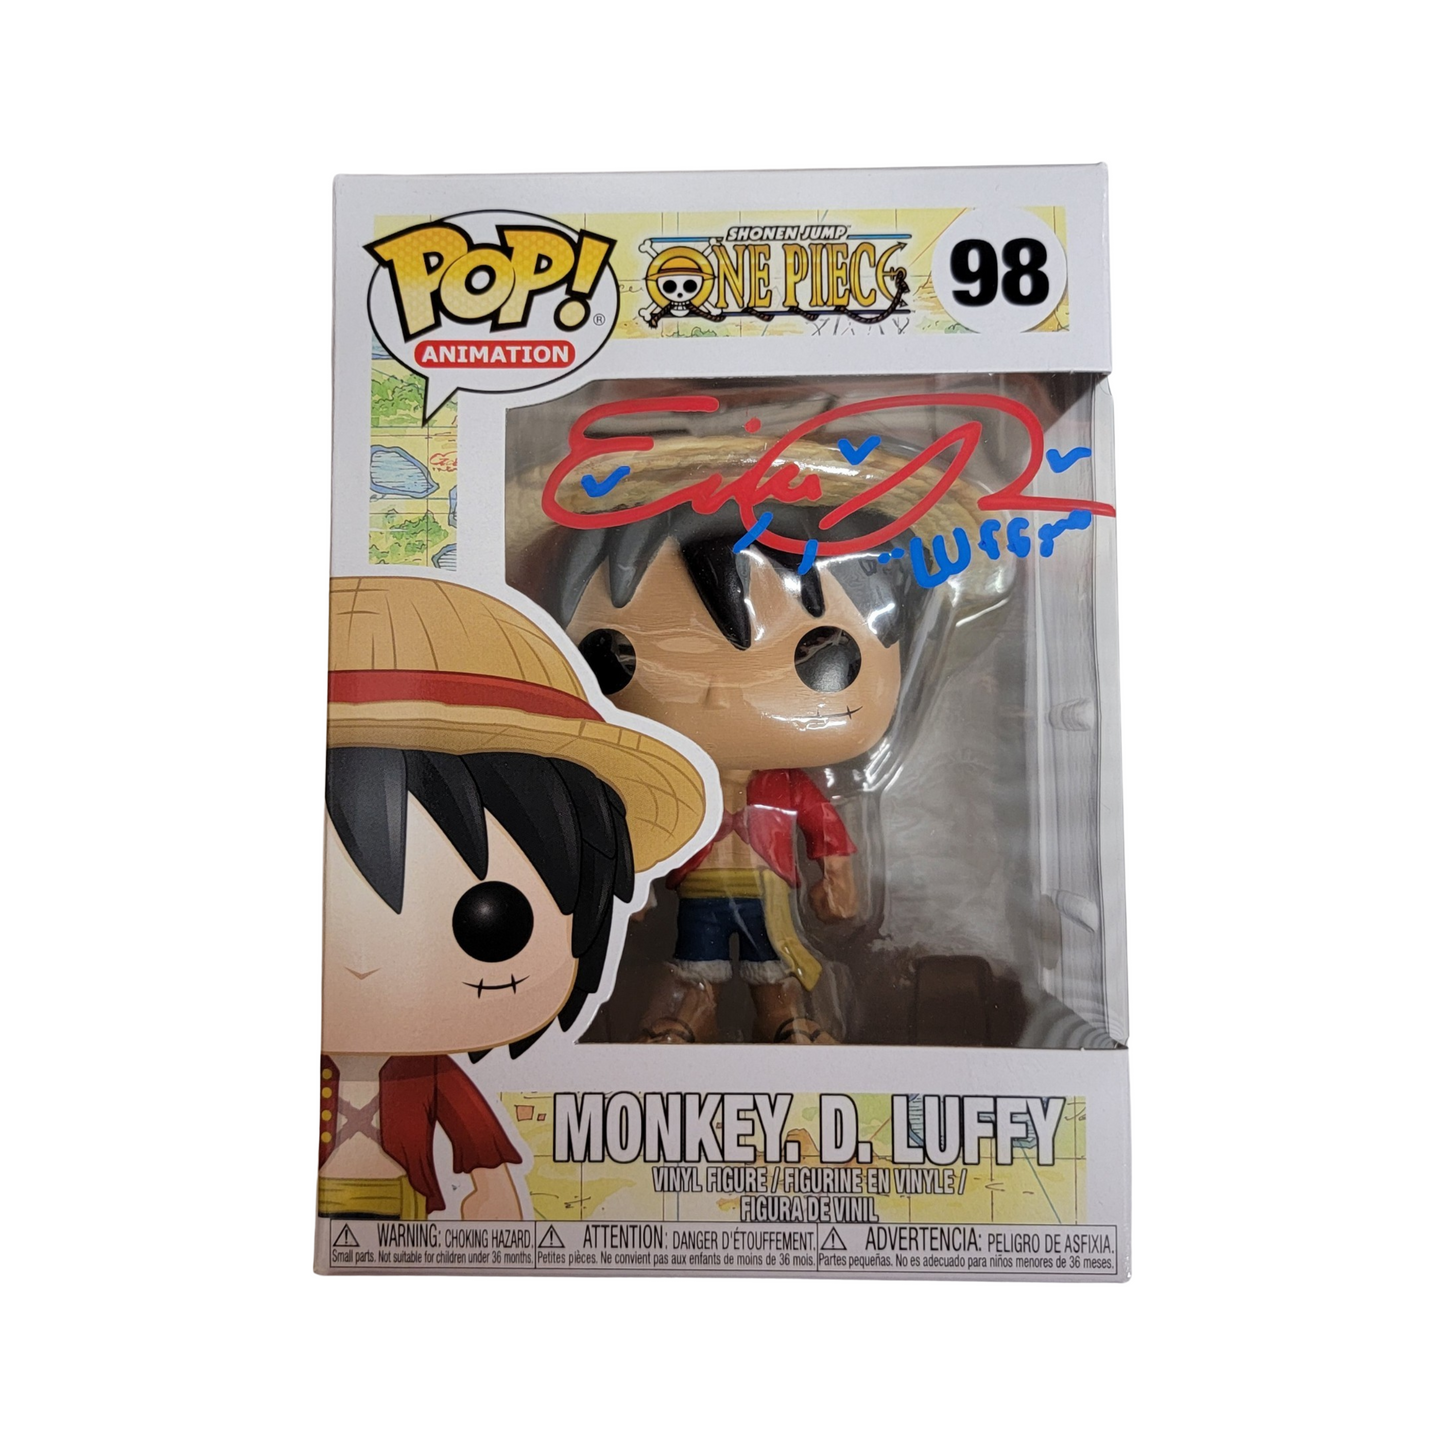 ERICA SCHROEDER SIGNED MONKEY D. LUFFY FUNKO POP! #98 AUTOGRAPH JSA AUTHENTICATED IN STOCK